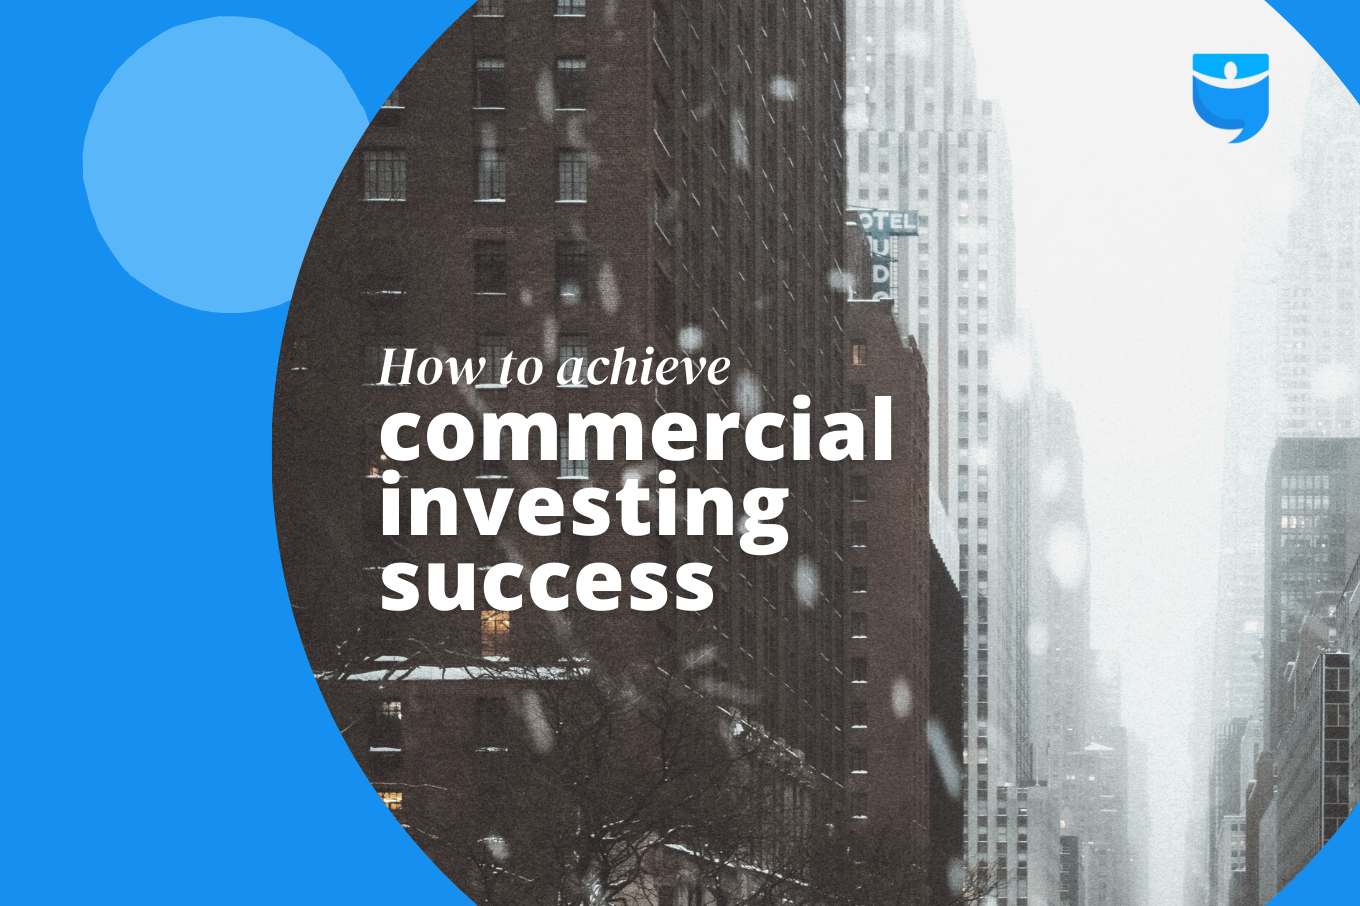 The 7 Keys to Commercial Real Estate Investing Success